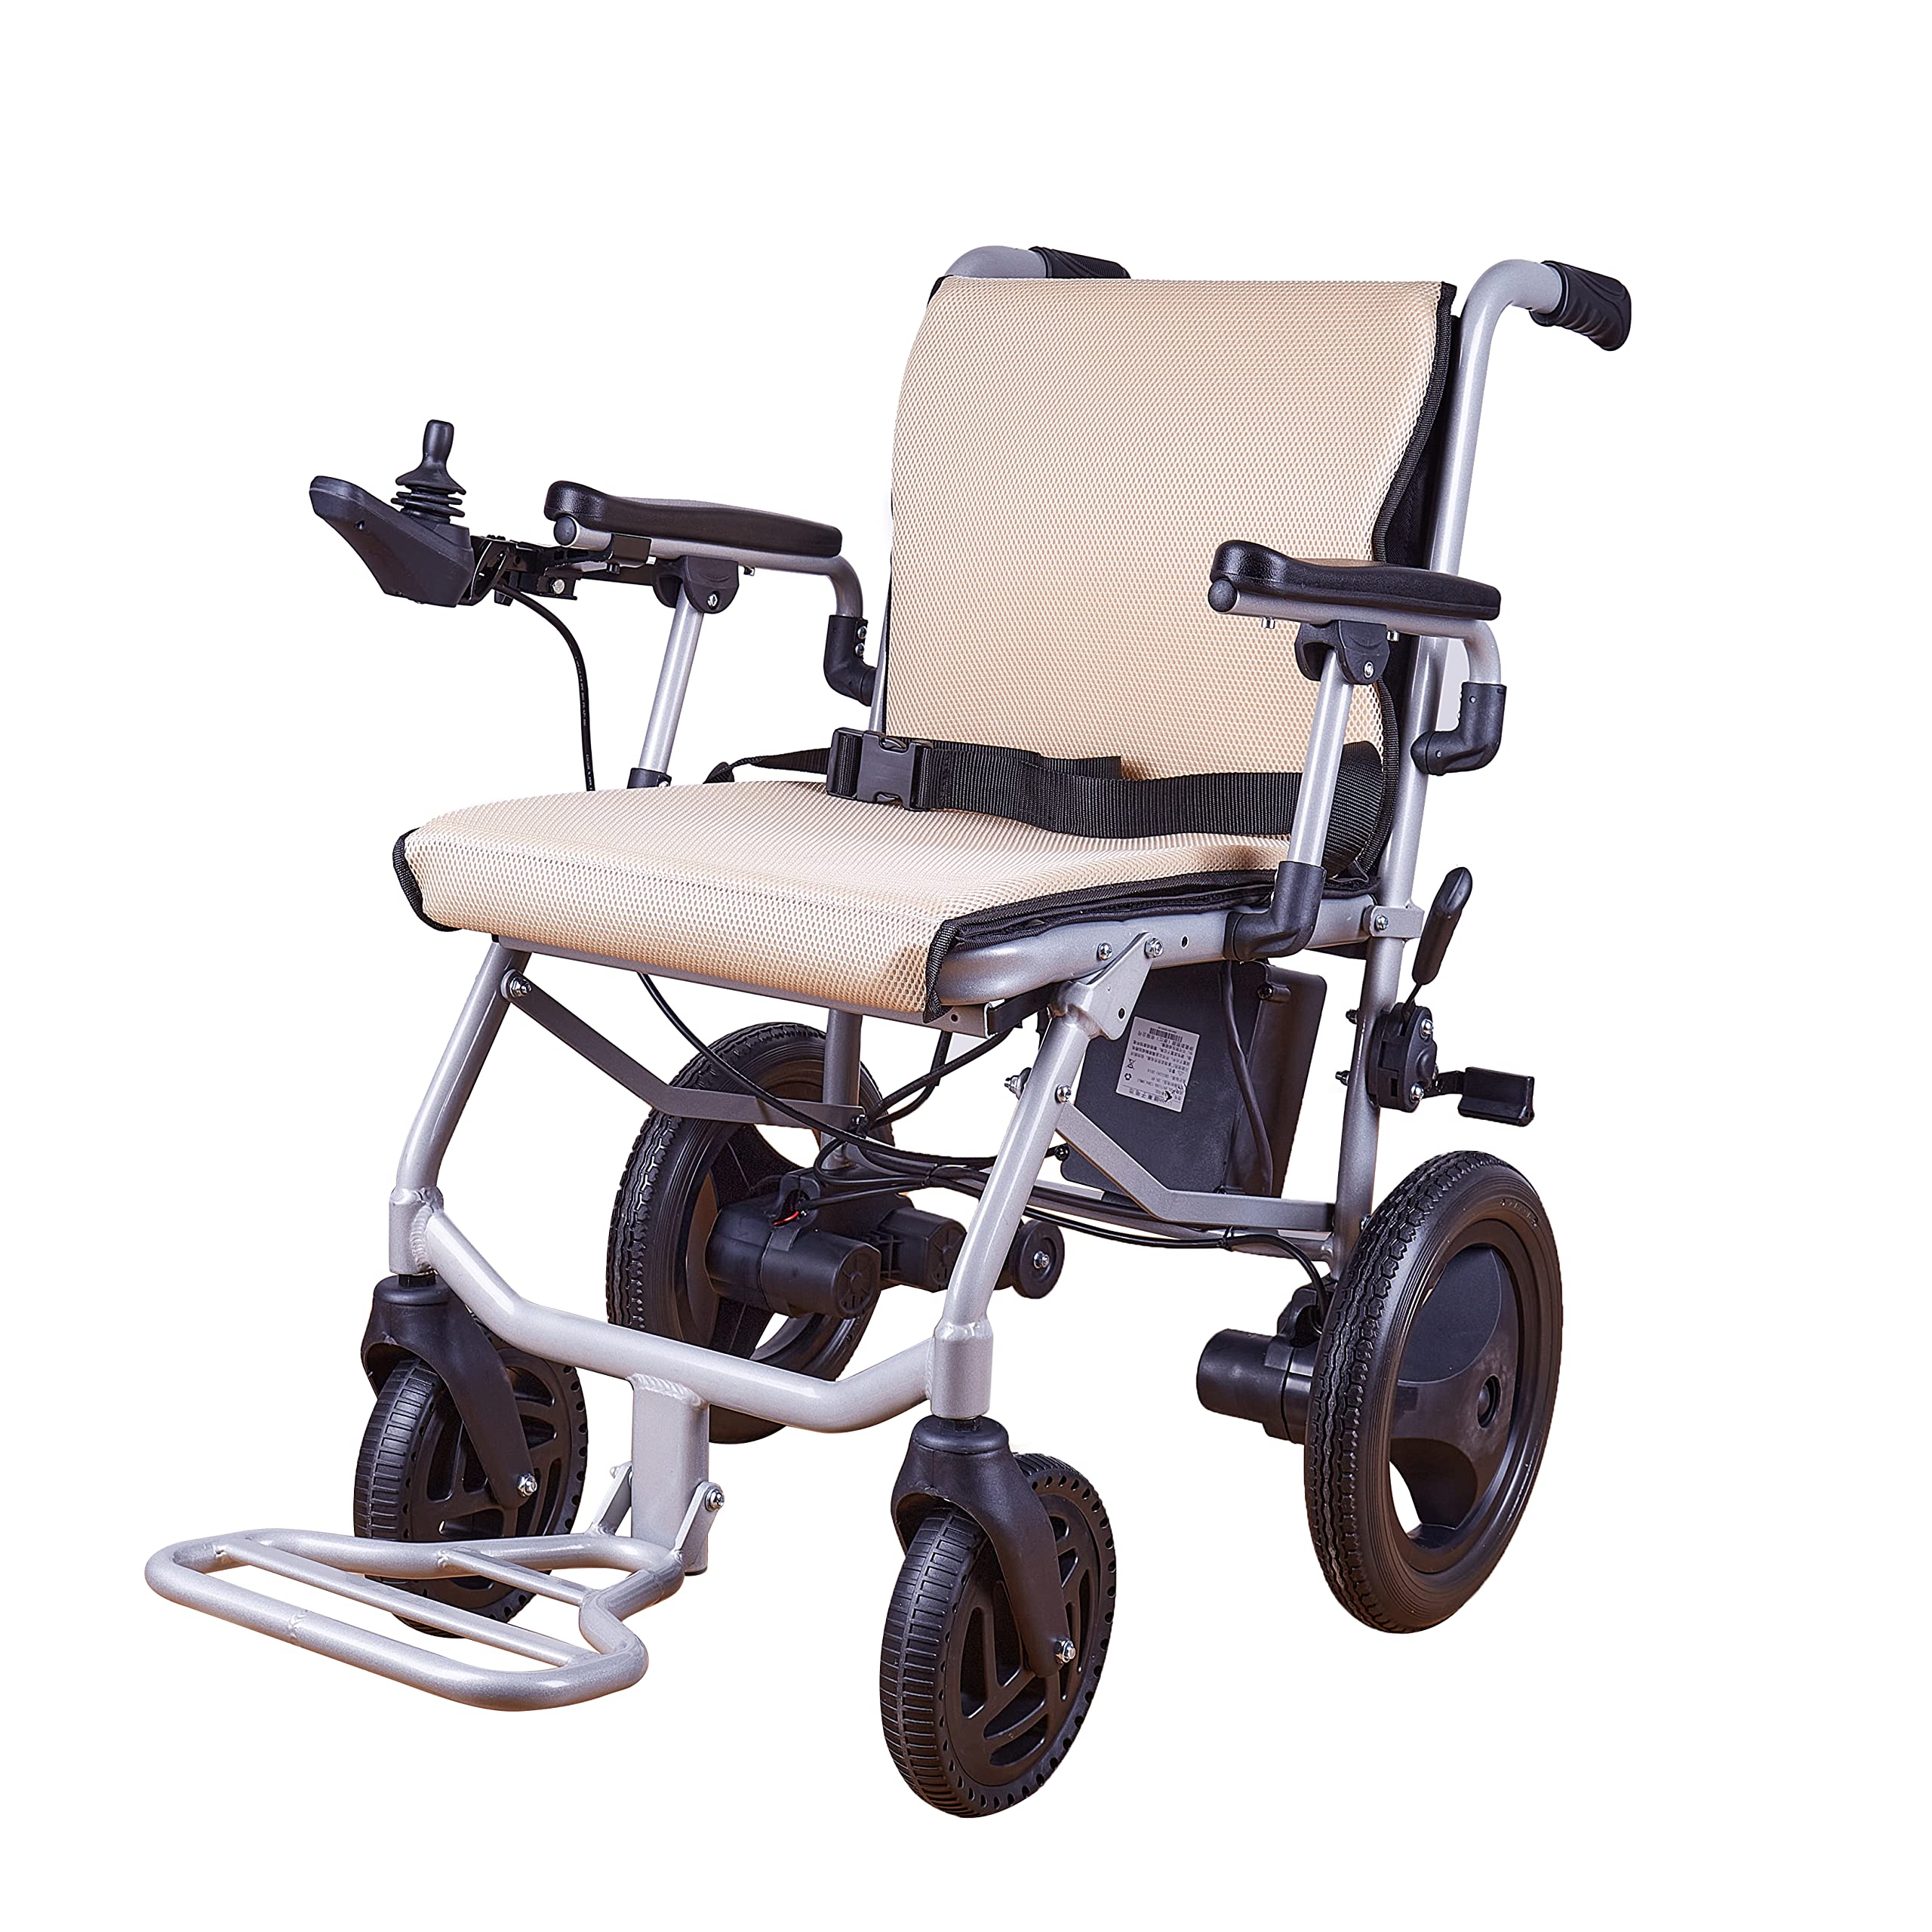 MaritSA World's Lightest Folding Electric Wheelchair - Weighs only 30 lbs - 12 mi Cruise Range - Detachable Battery - Serviced from USA